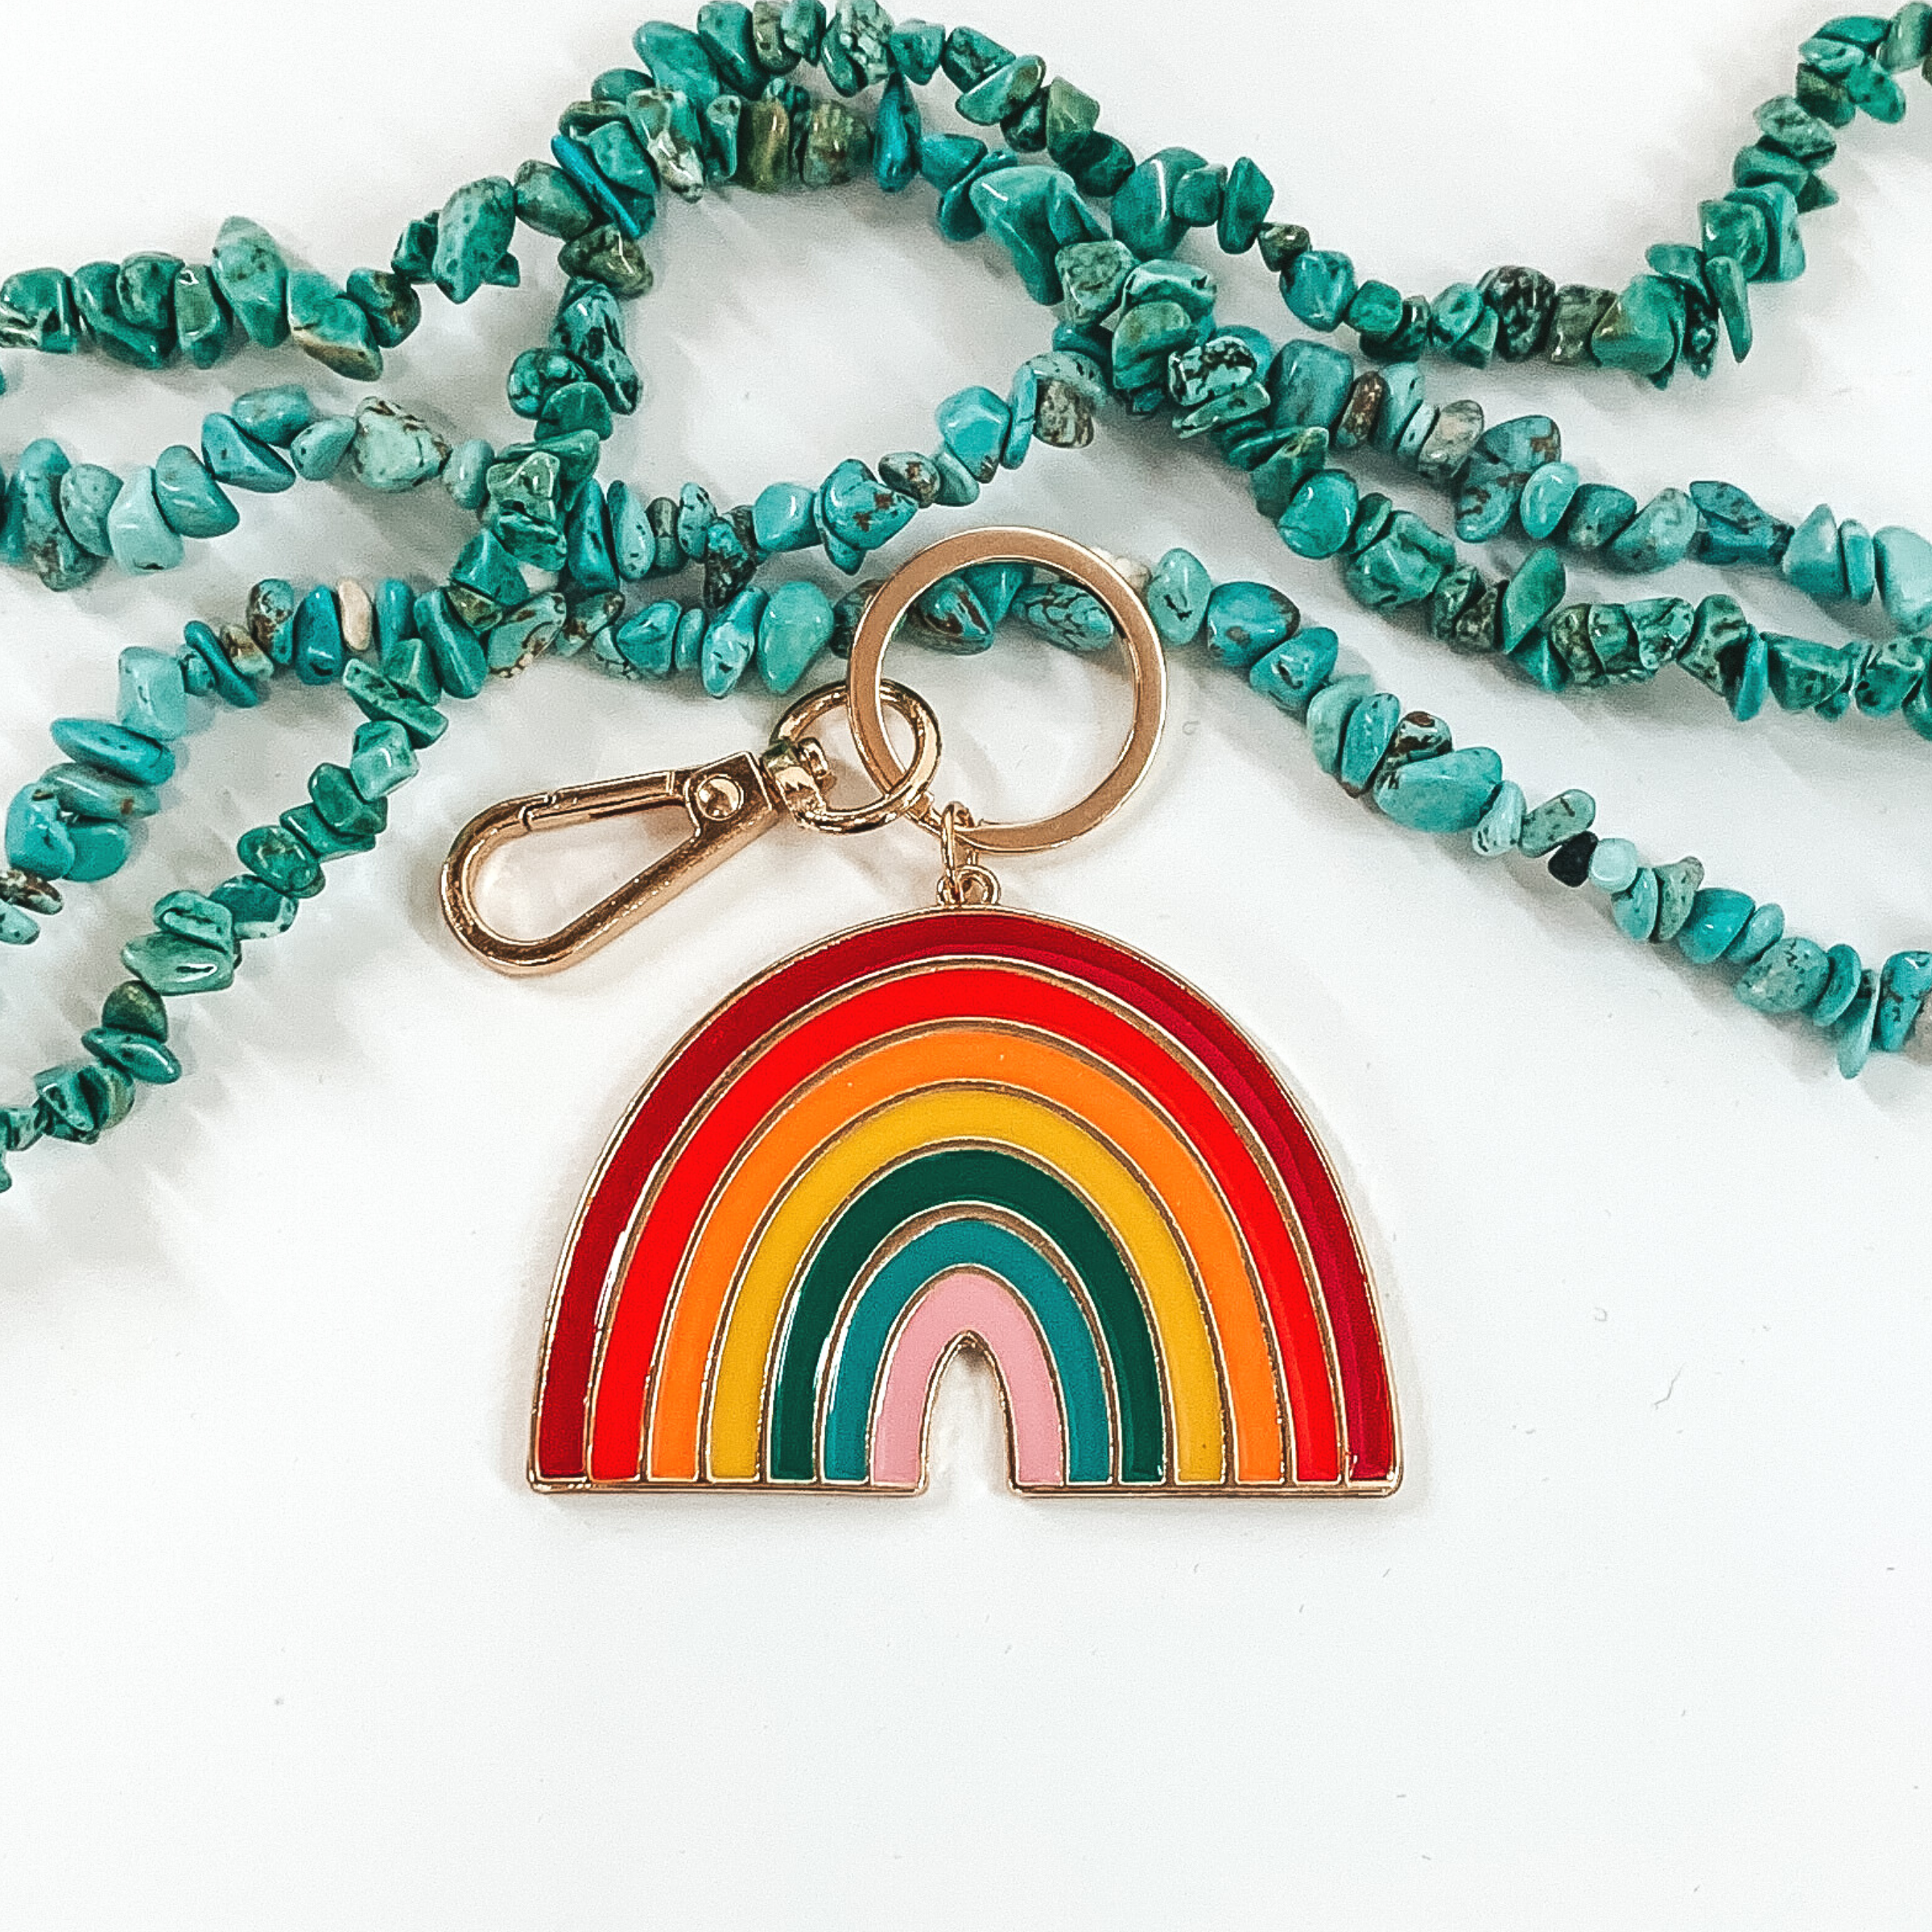 This is a gold chain with a rainbow pendant that includes the colors maroon, red, orange, yellow, green, light blue, and lilac. It is pictured on a white background with turquoise beads in at the top of the picture.